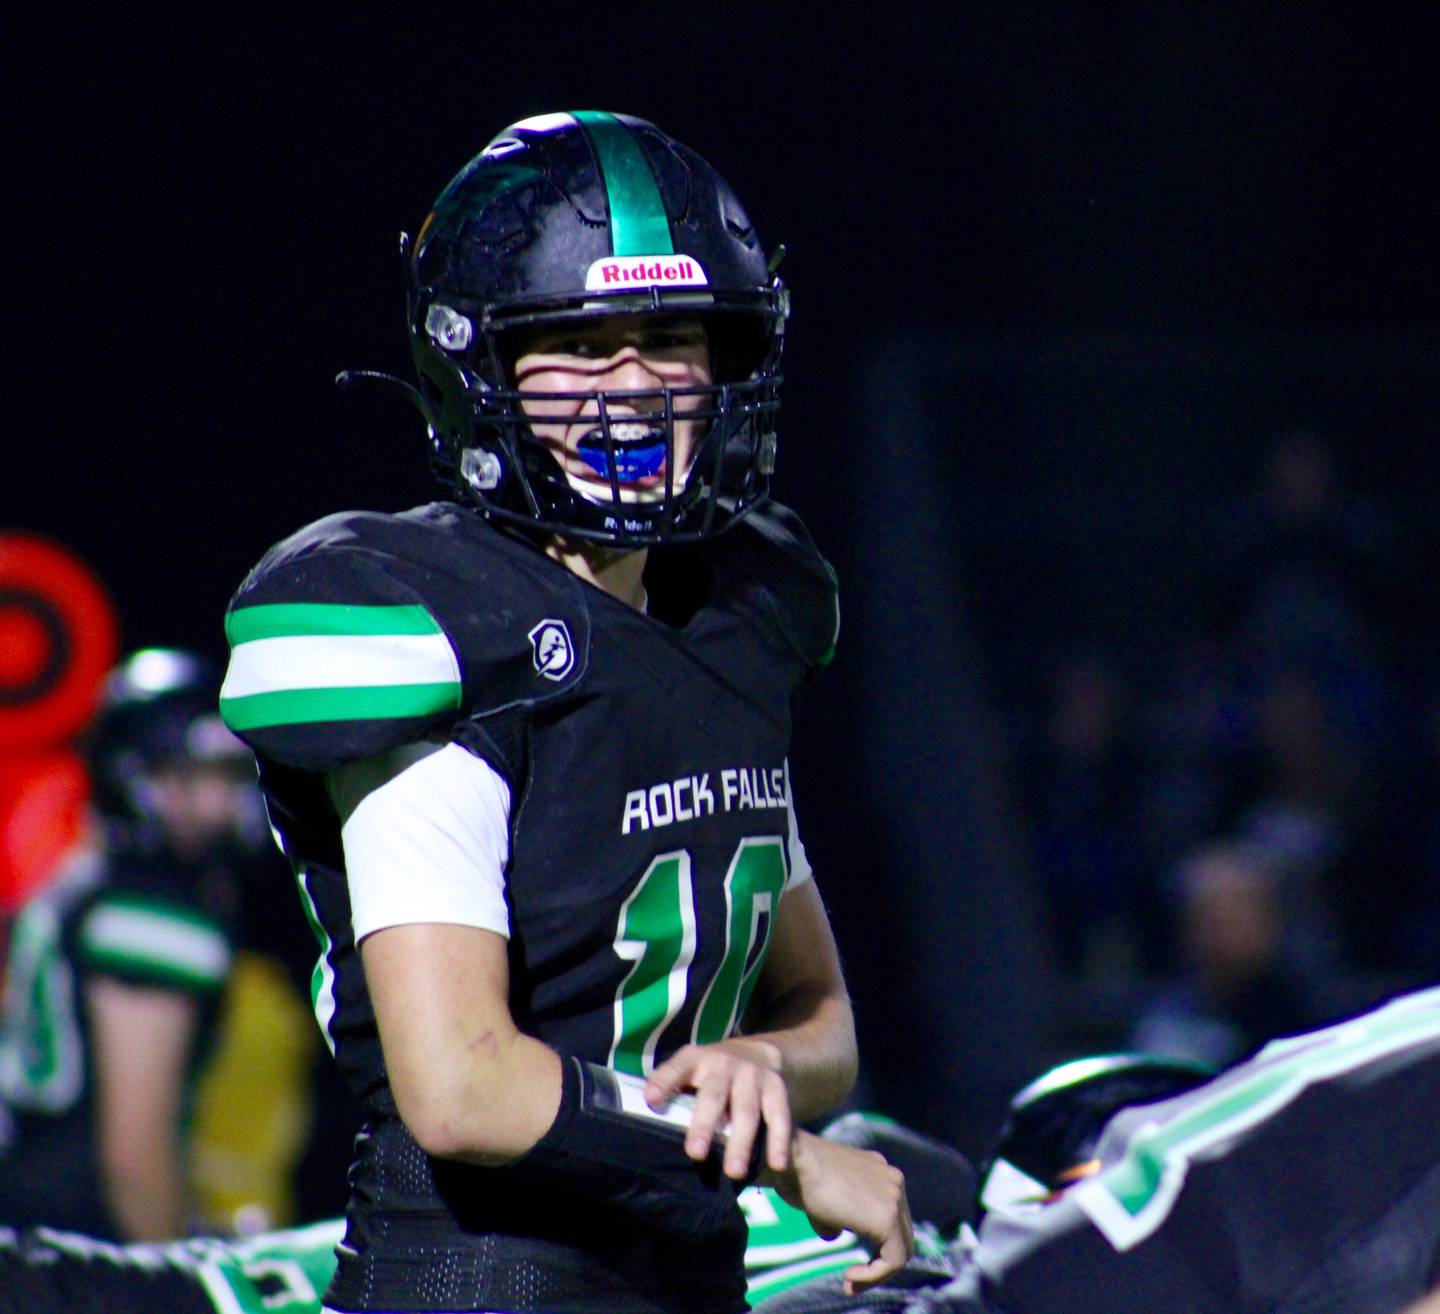 Rock Falls quarterback Easton Canales (10) calls a play during the first half on Friday, Oct. 8, 2021 during its homecoming game against North Boone.